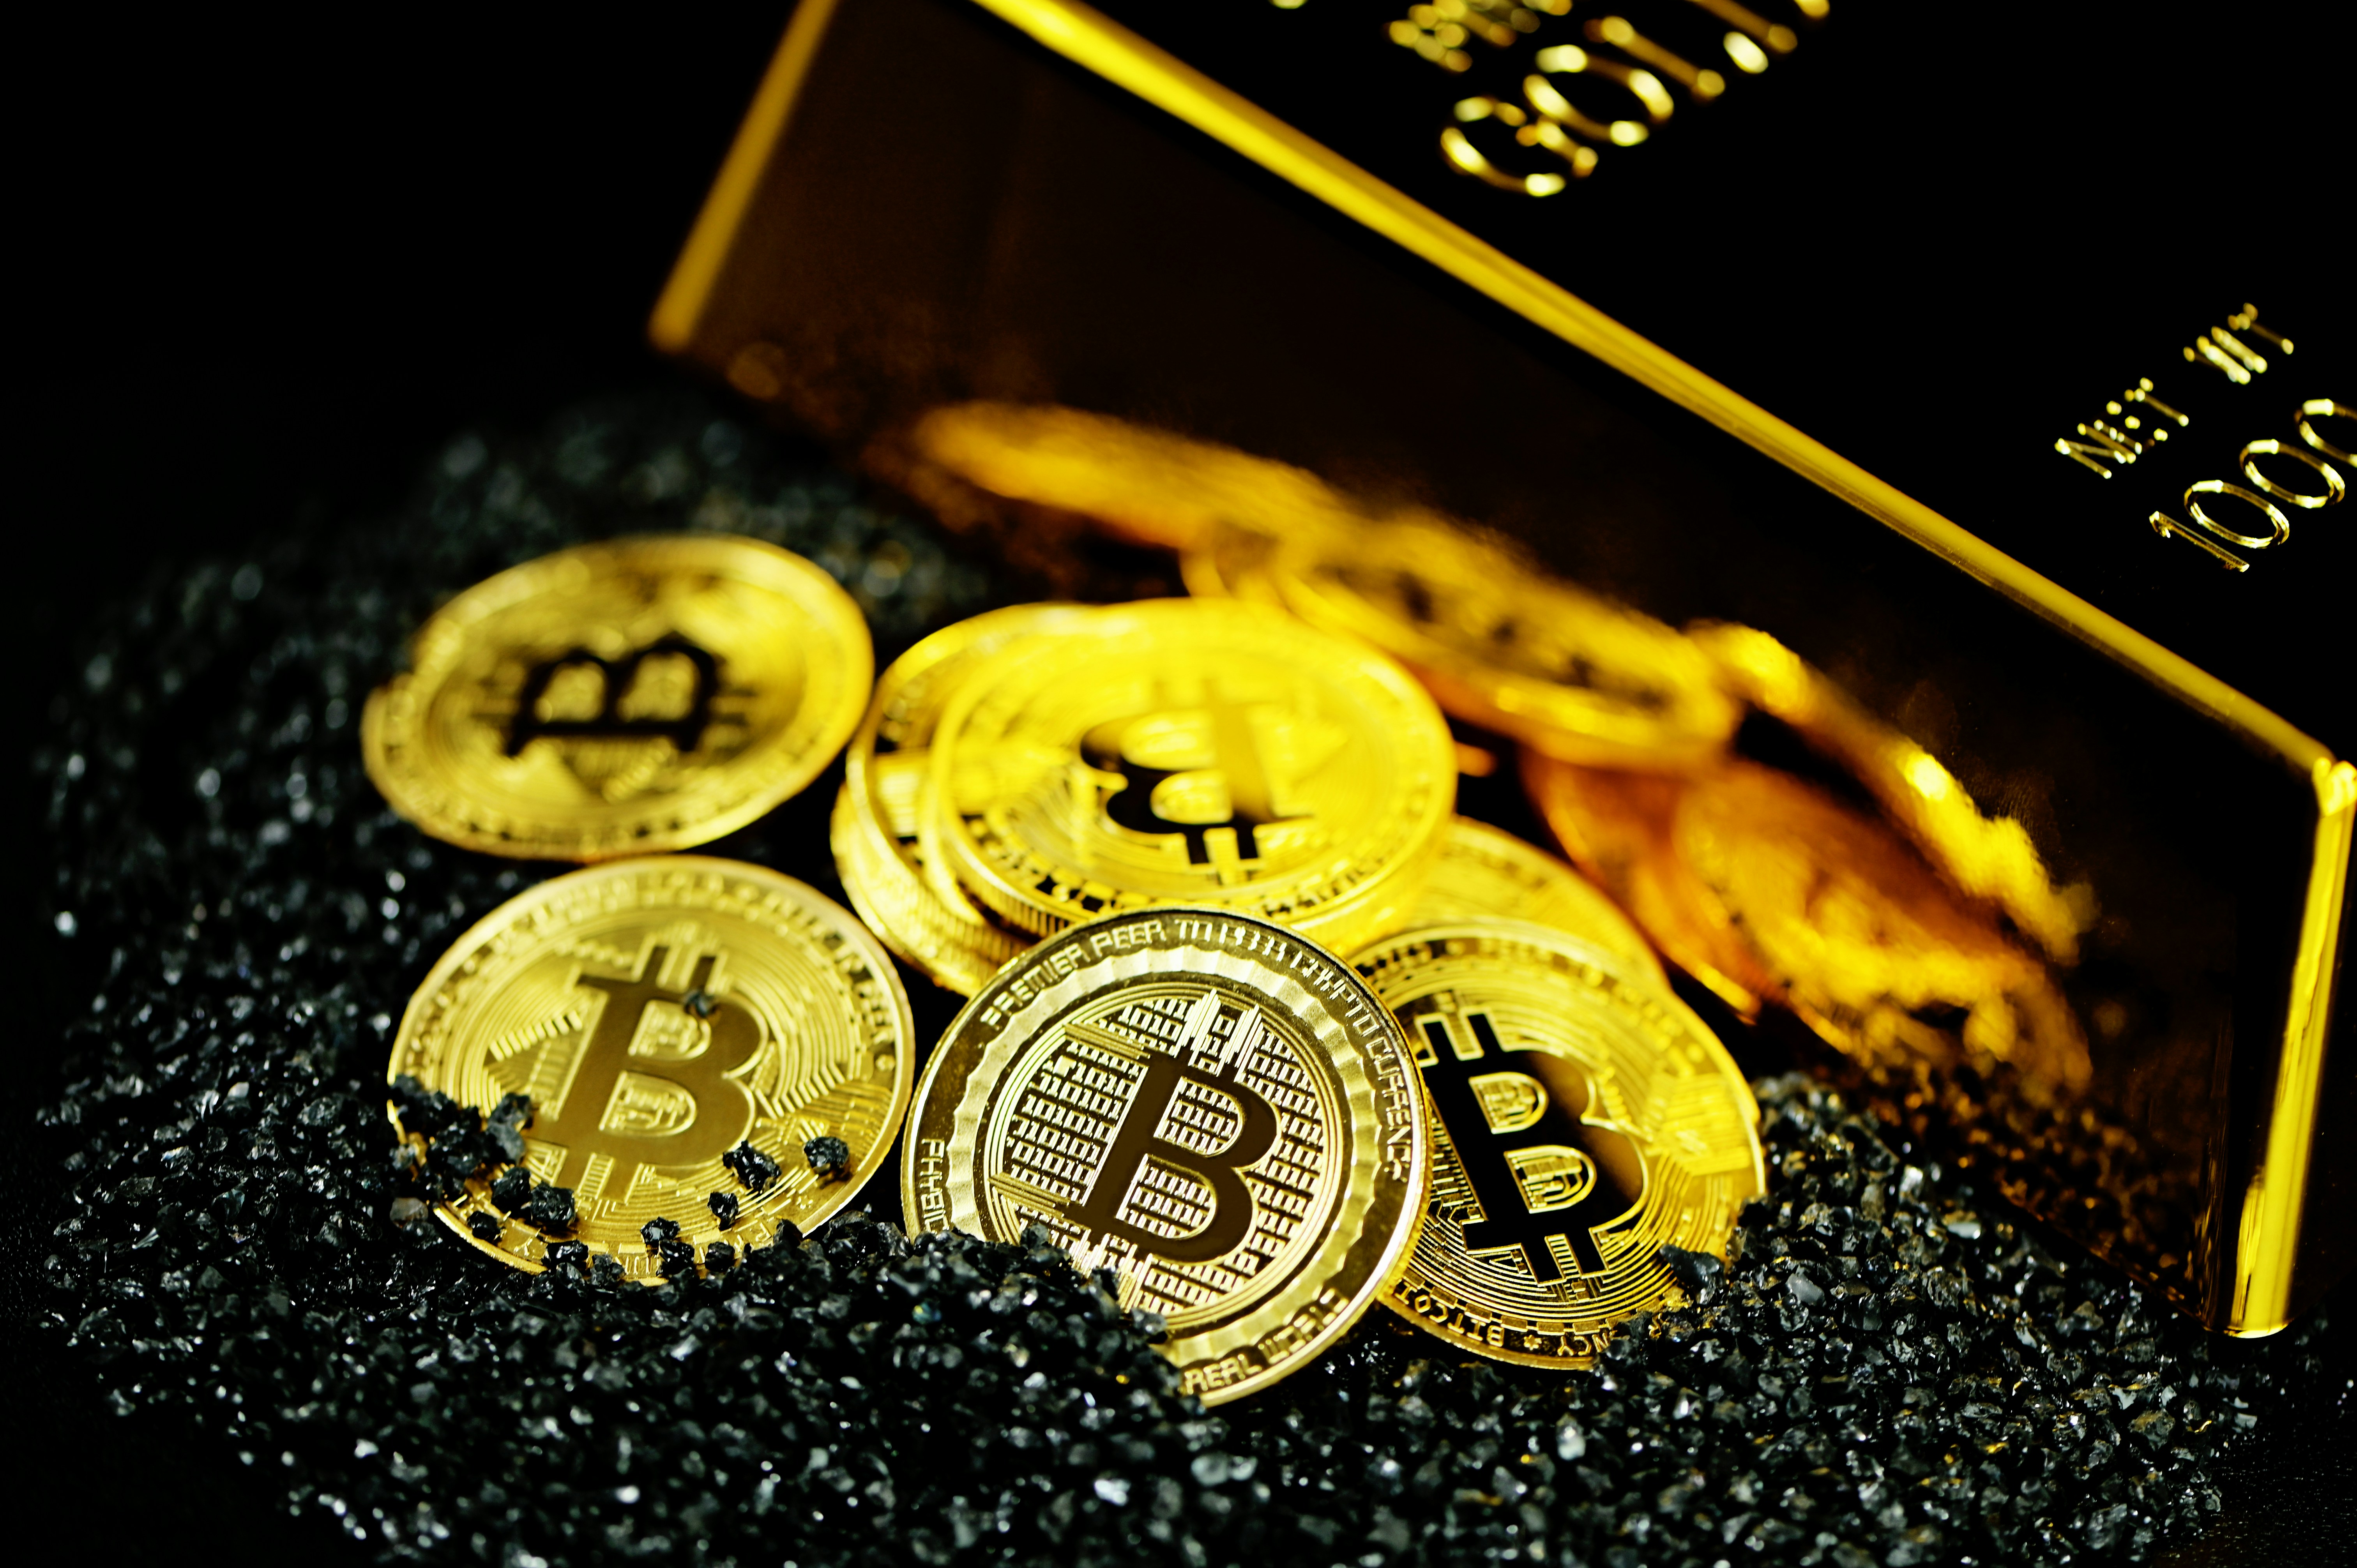 A pile of Bitcoins on black crystals next to a gold bullion